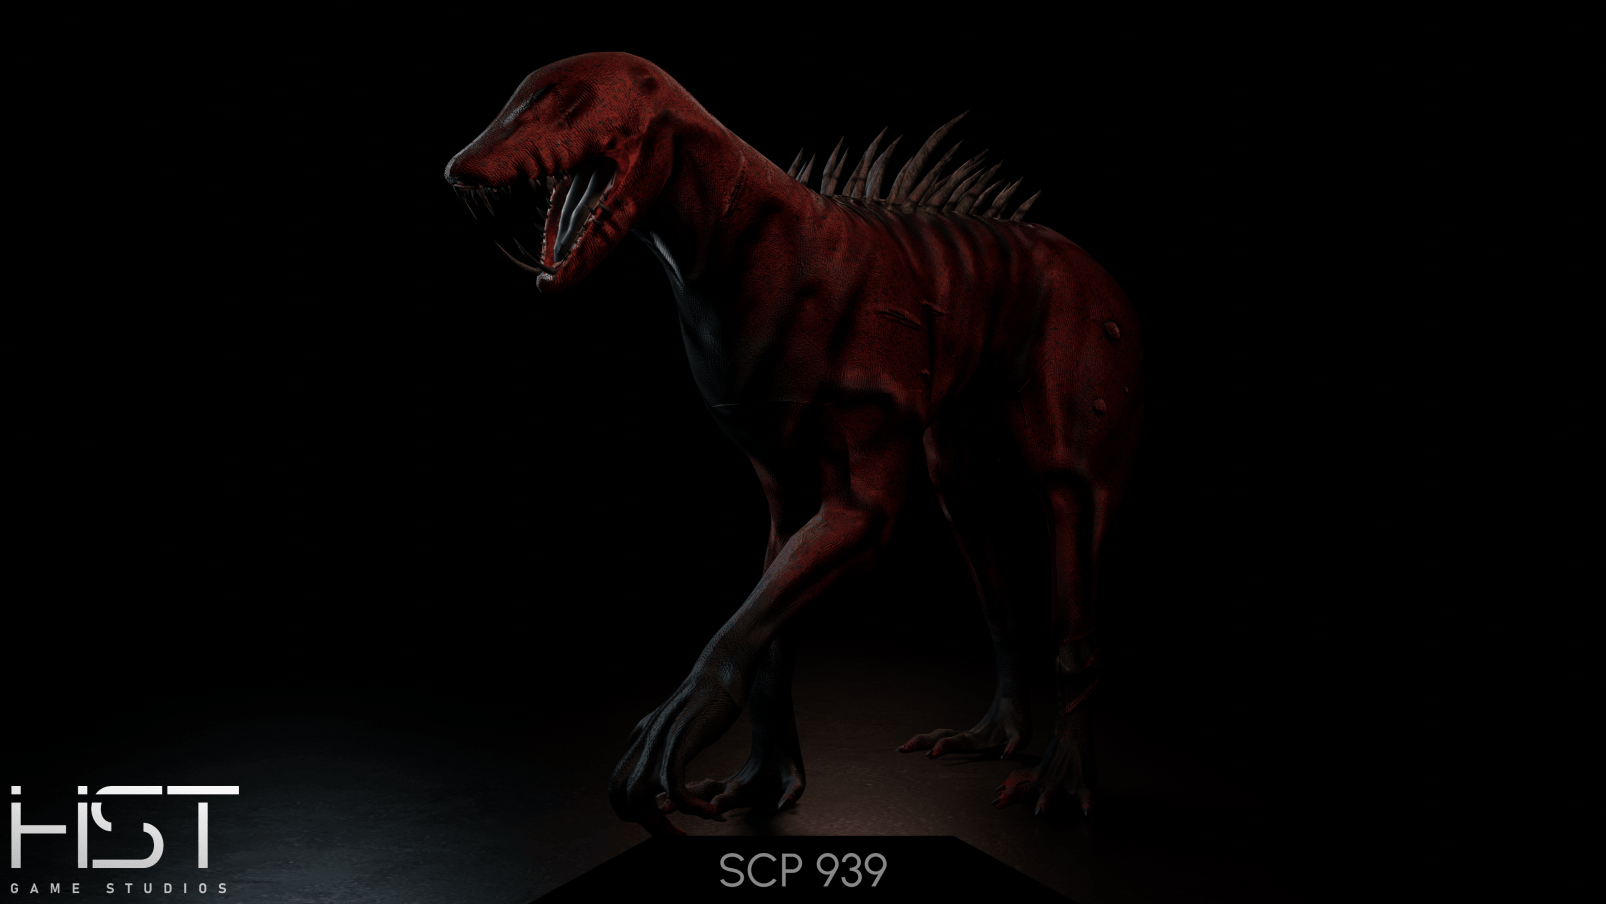 SCP-939 is now more talkative in the latest update and is able to hear